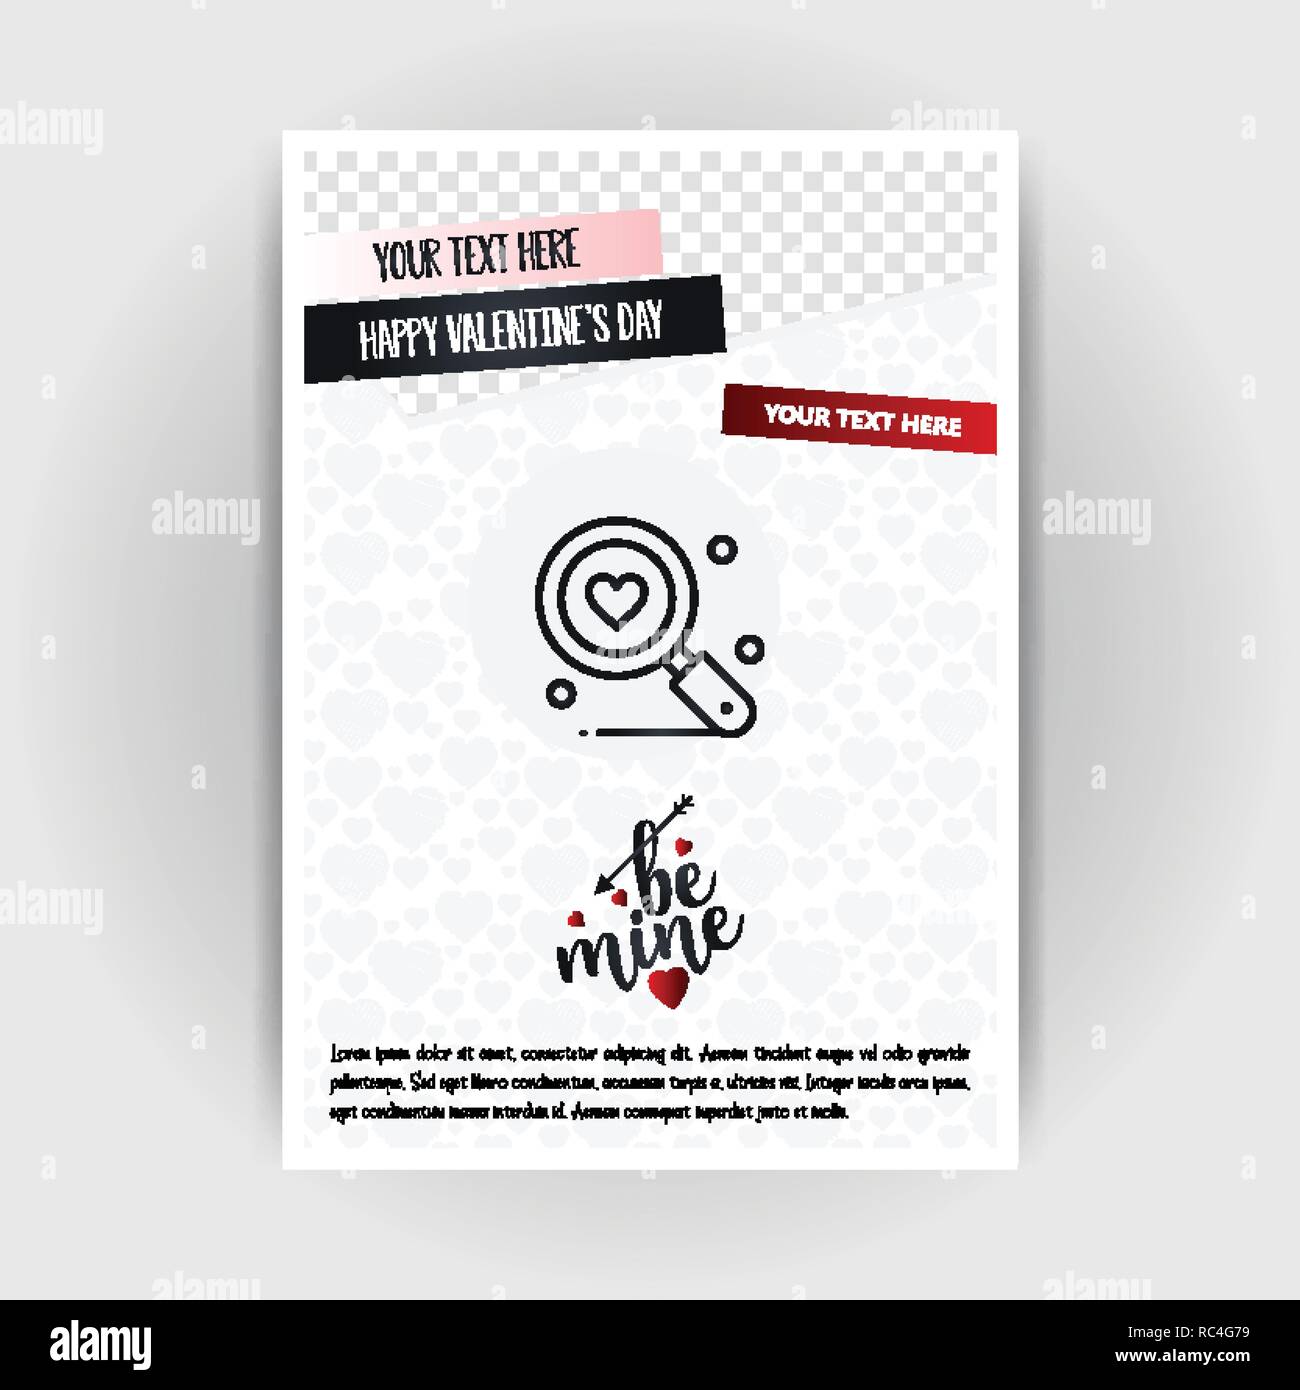 Valentine's Day Love Poster Template. Place for Images and text, vector illustration Stock Vector